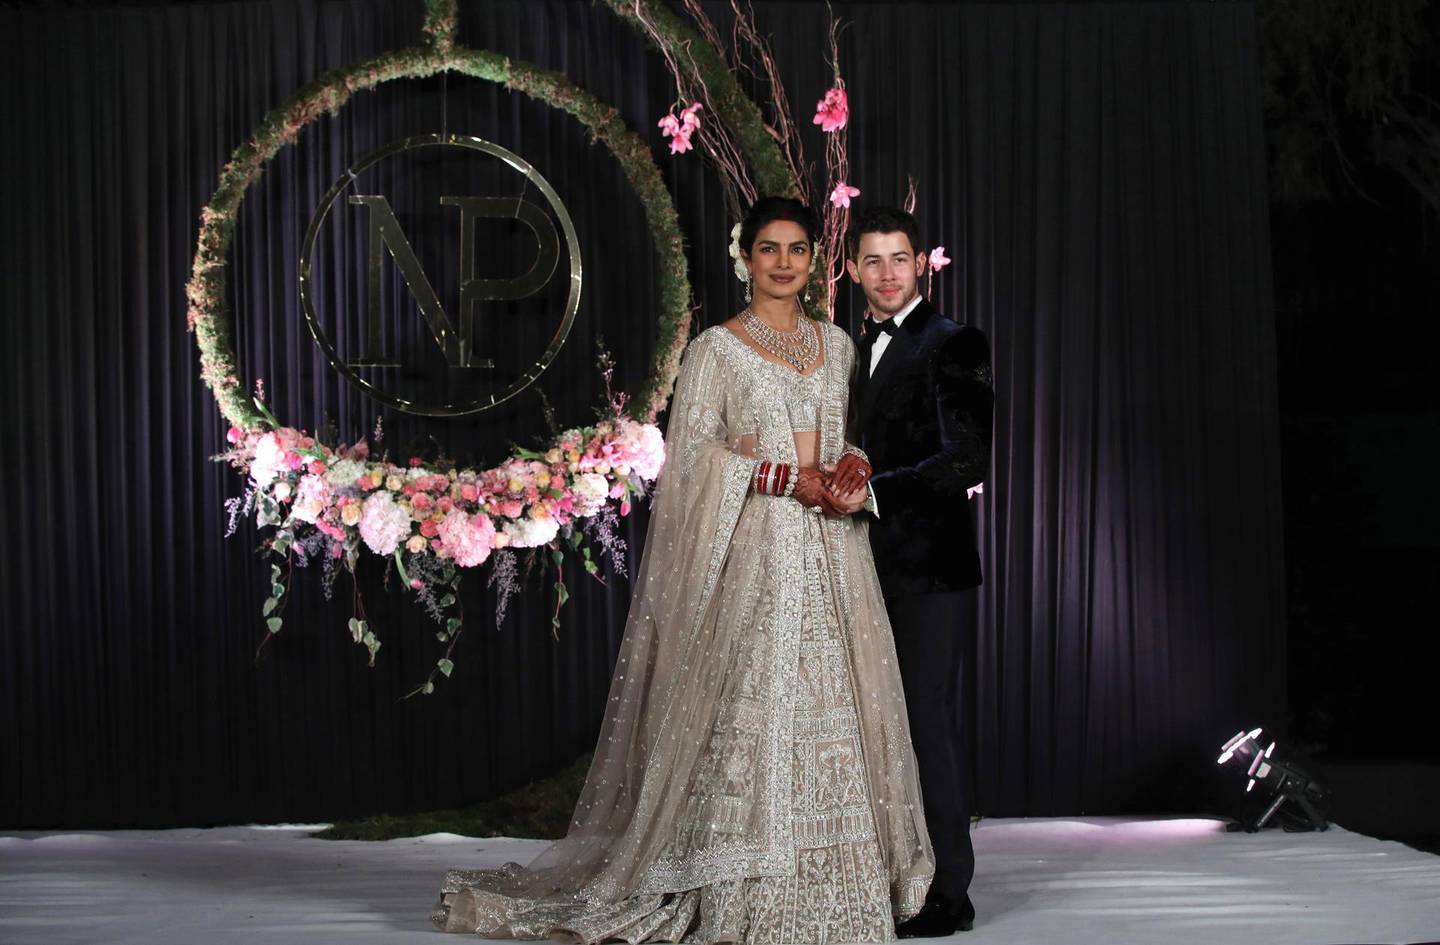 epa07208514 Newlyweds, Bollywood actress Priyanka Chopra (L) and US musician Nick Jonas (R) pose for photographs during a reception in New Delhi, India, 04 December 2018. According to media reports, the couple hosted wedding celebrations in Jodphur on 01 and 02 December.  EPA-EFE/RAJAT GUPTA